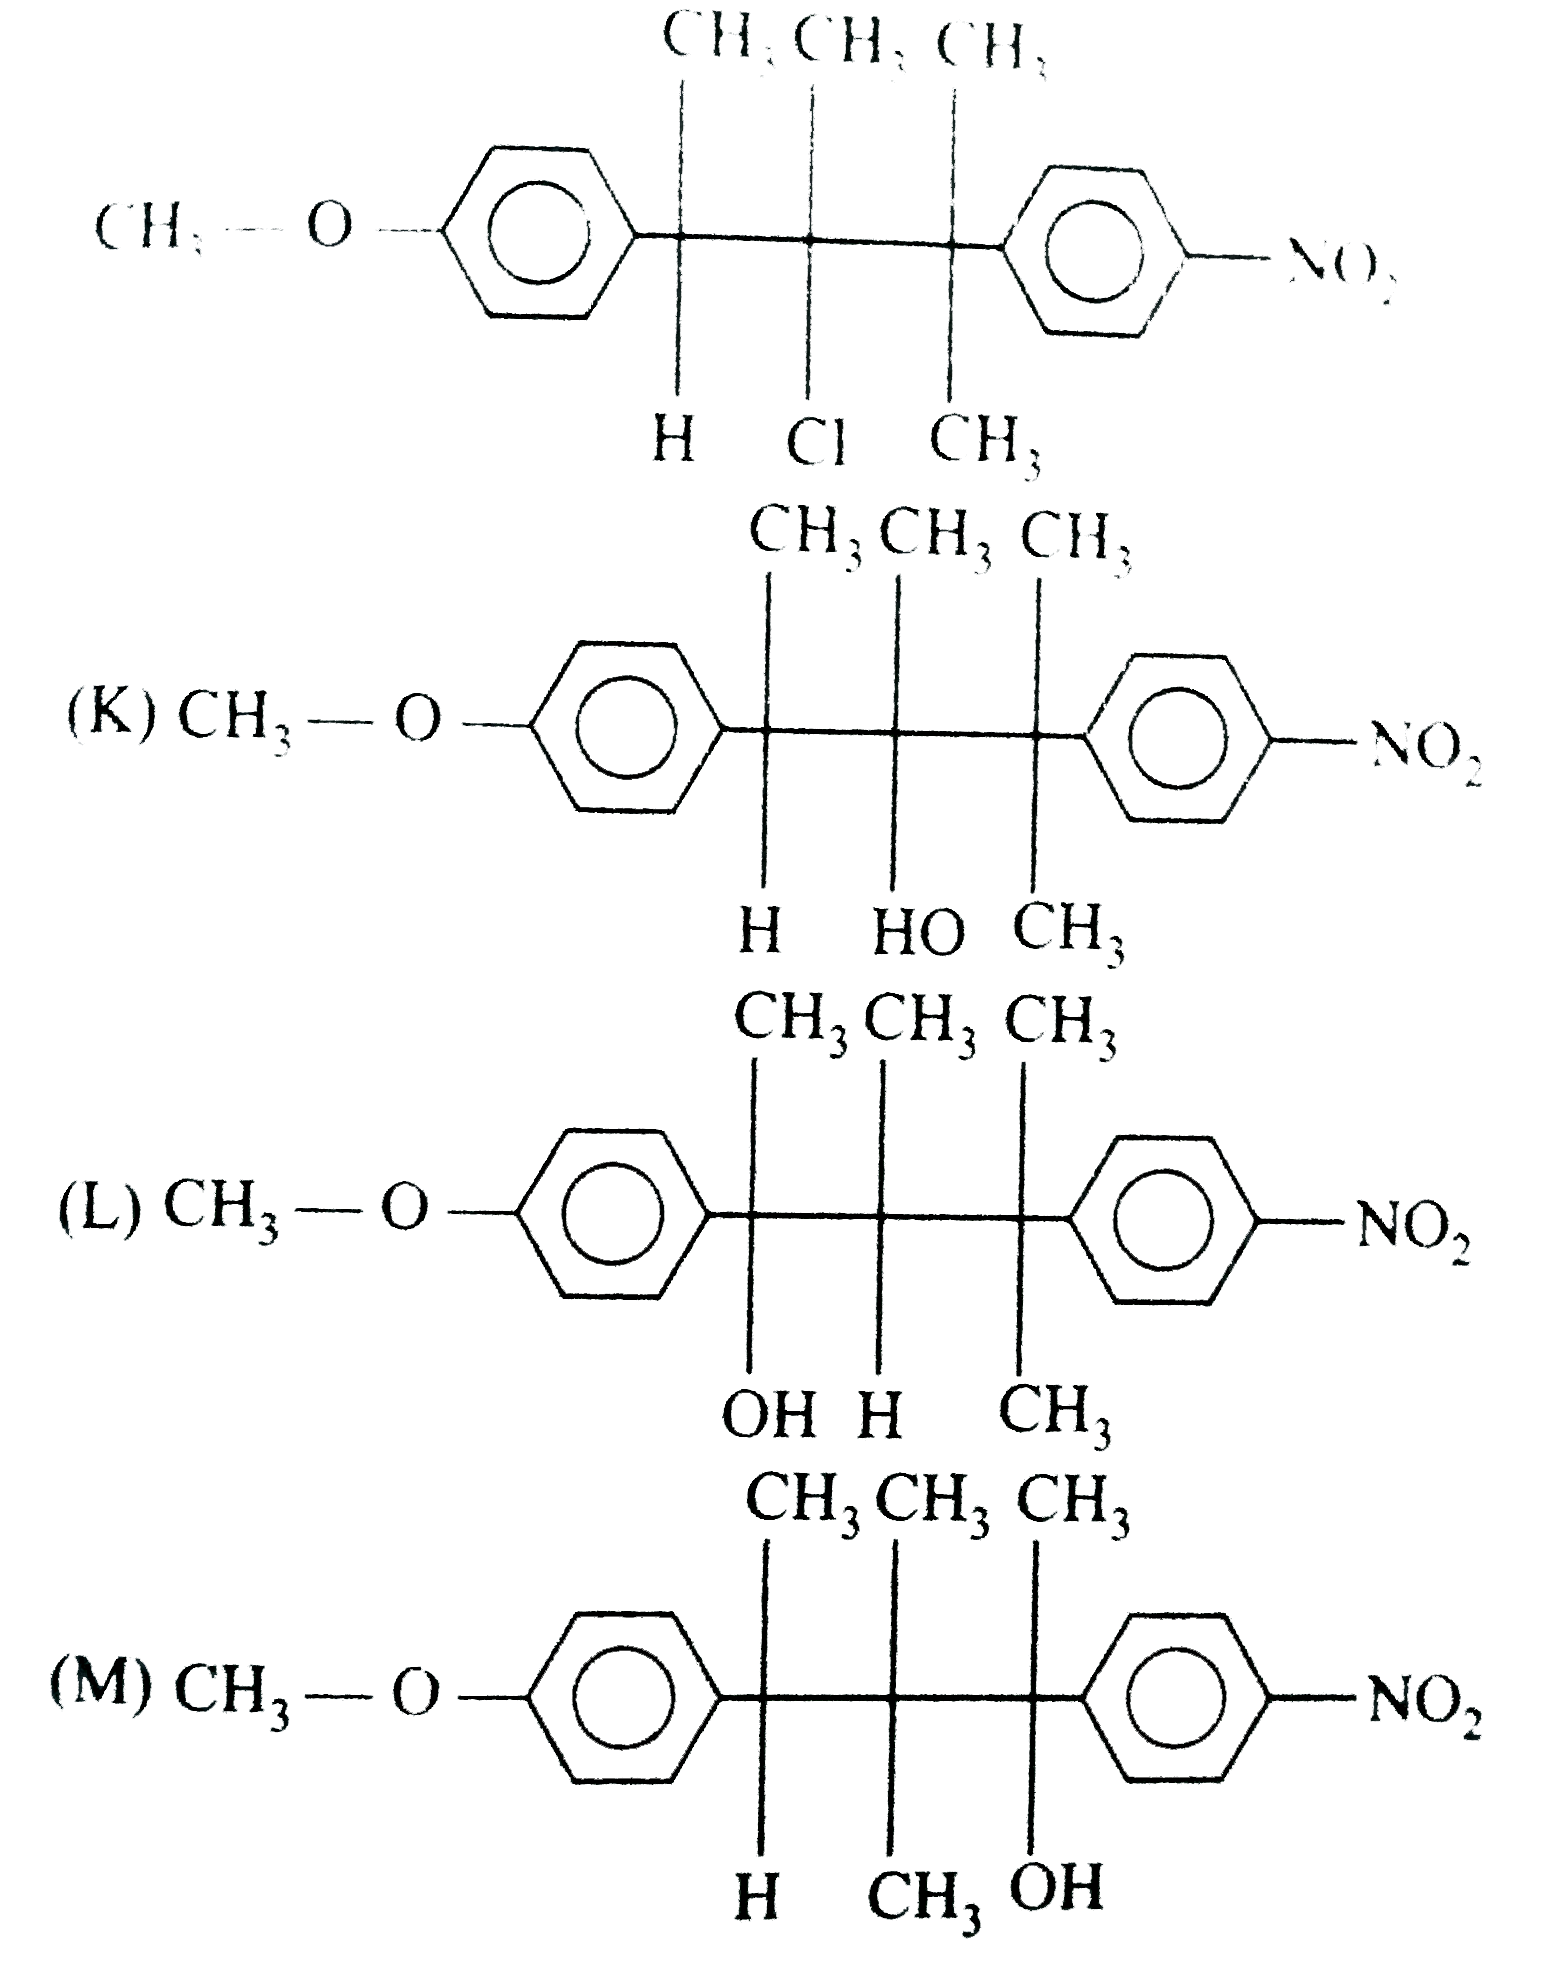 The following compound on hydrolysis in aqueous acetone will give .